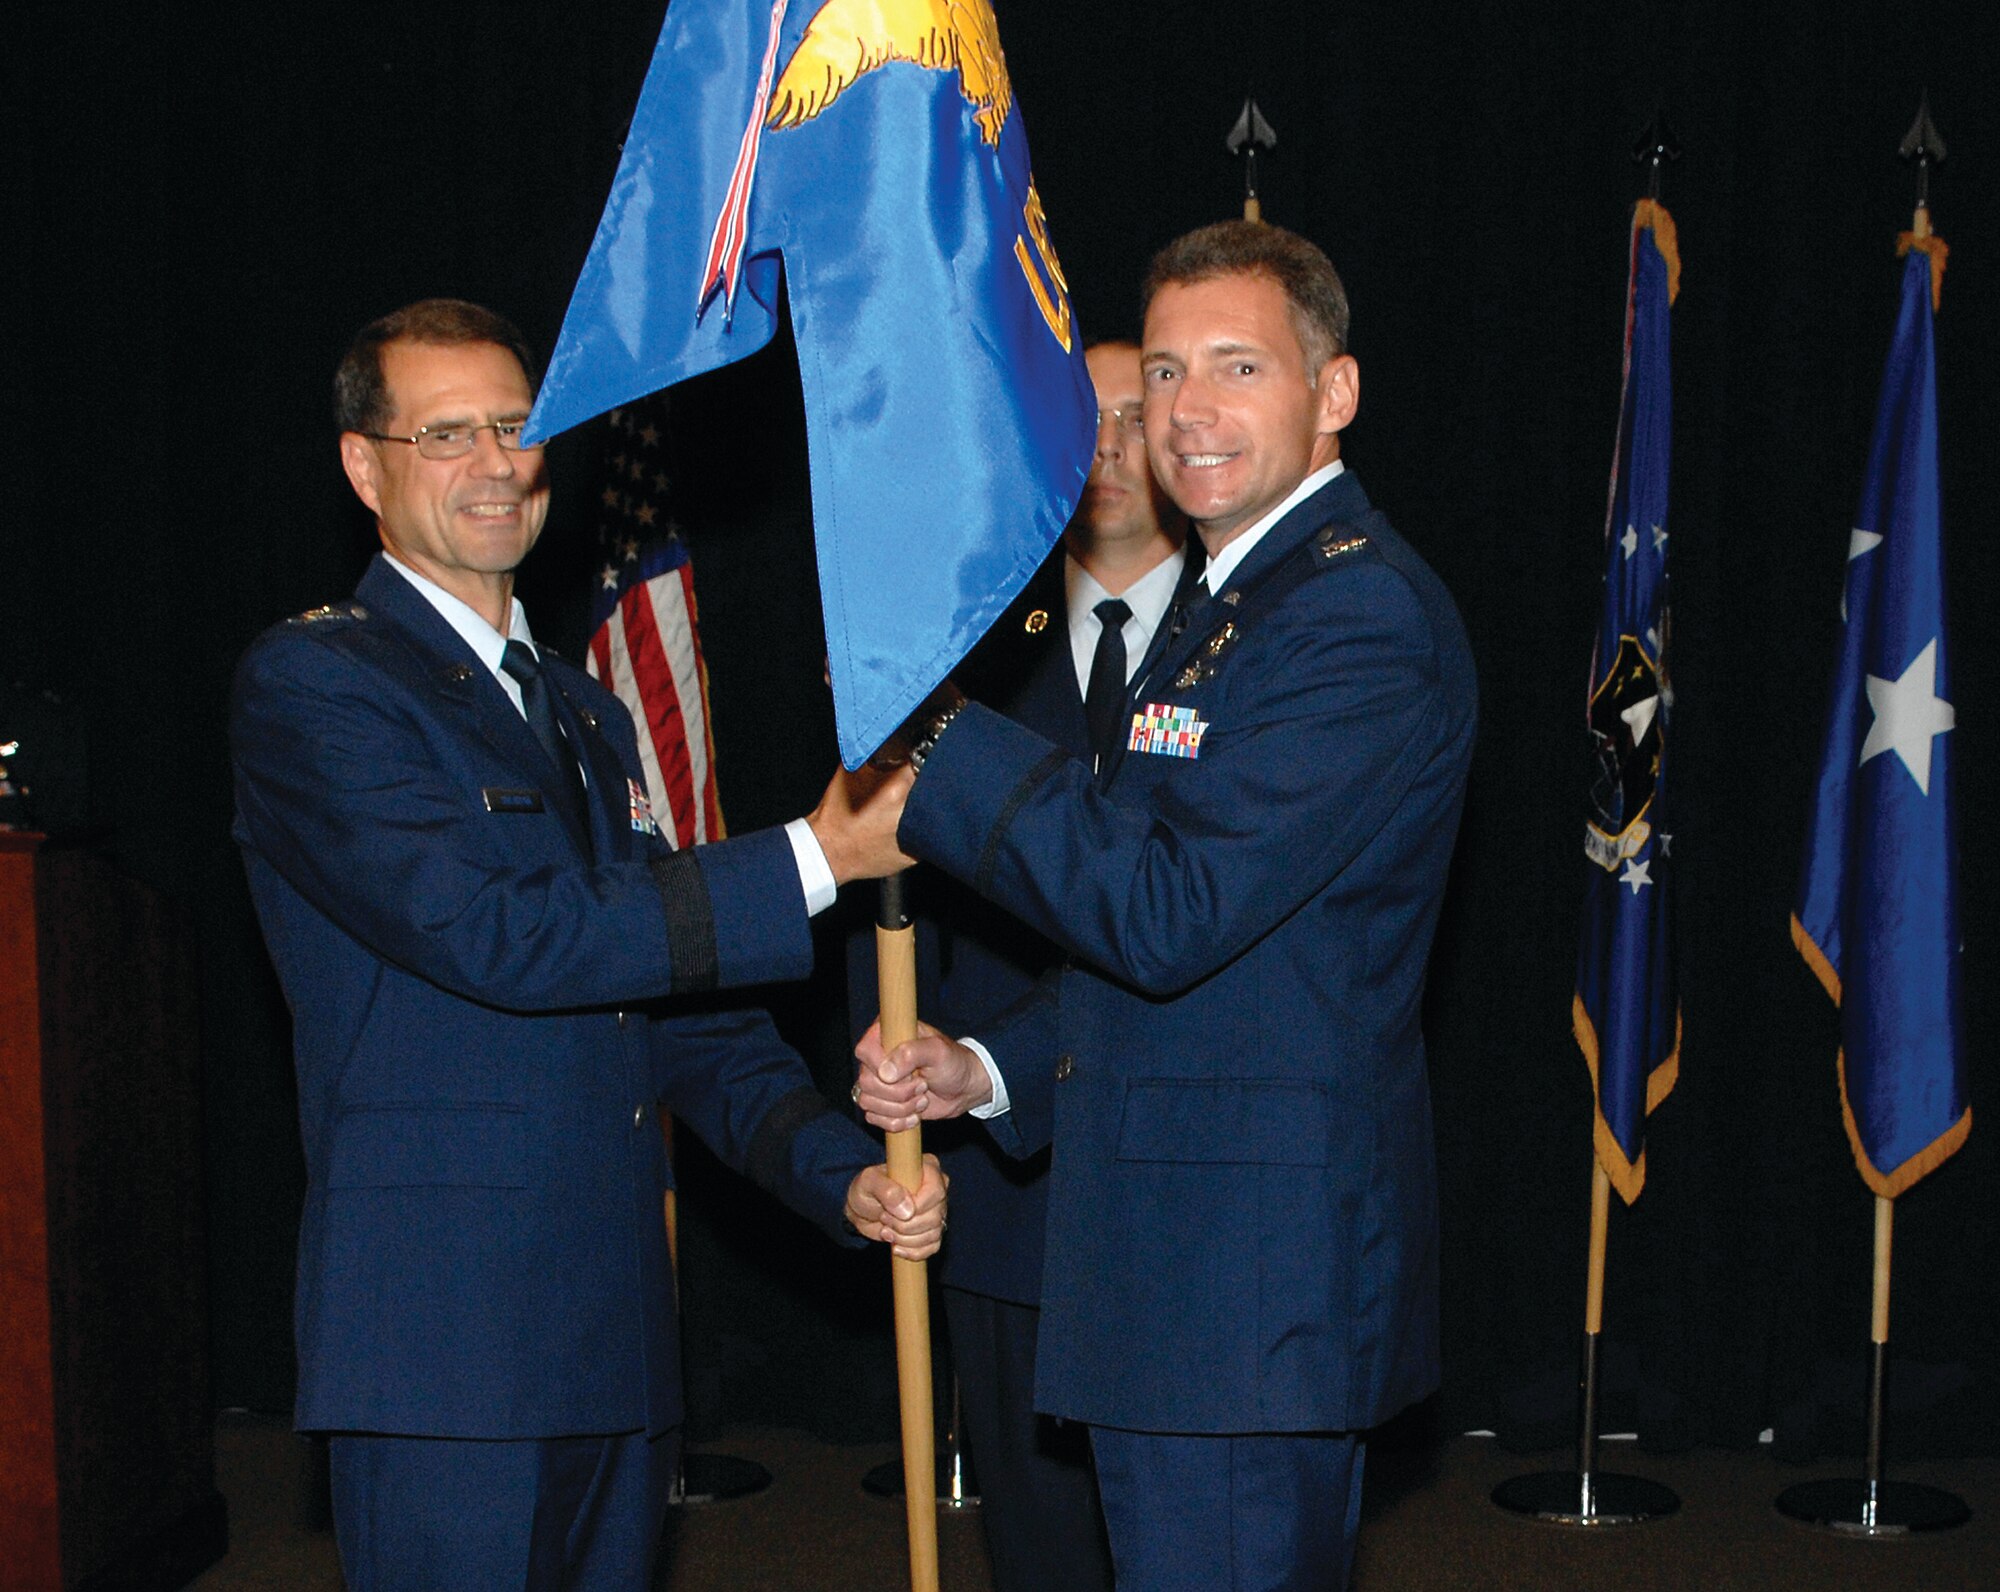 Col. Gary Henry accepts the Launch and Range Systems Wing guidon from AFSPC/SMC Commander, Lt. Gen. John T. 'Tom' Sheridan signifying his acceptance of command as the new commander of AFSPC Space and Missile Systems Center Launch and Range Systems Wing. Colonel Henry, formerly vice commander of the Space Superiority Systems Wing. (photo by Stephen Schester)